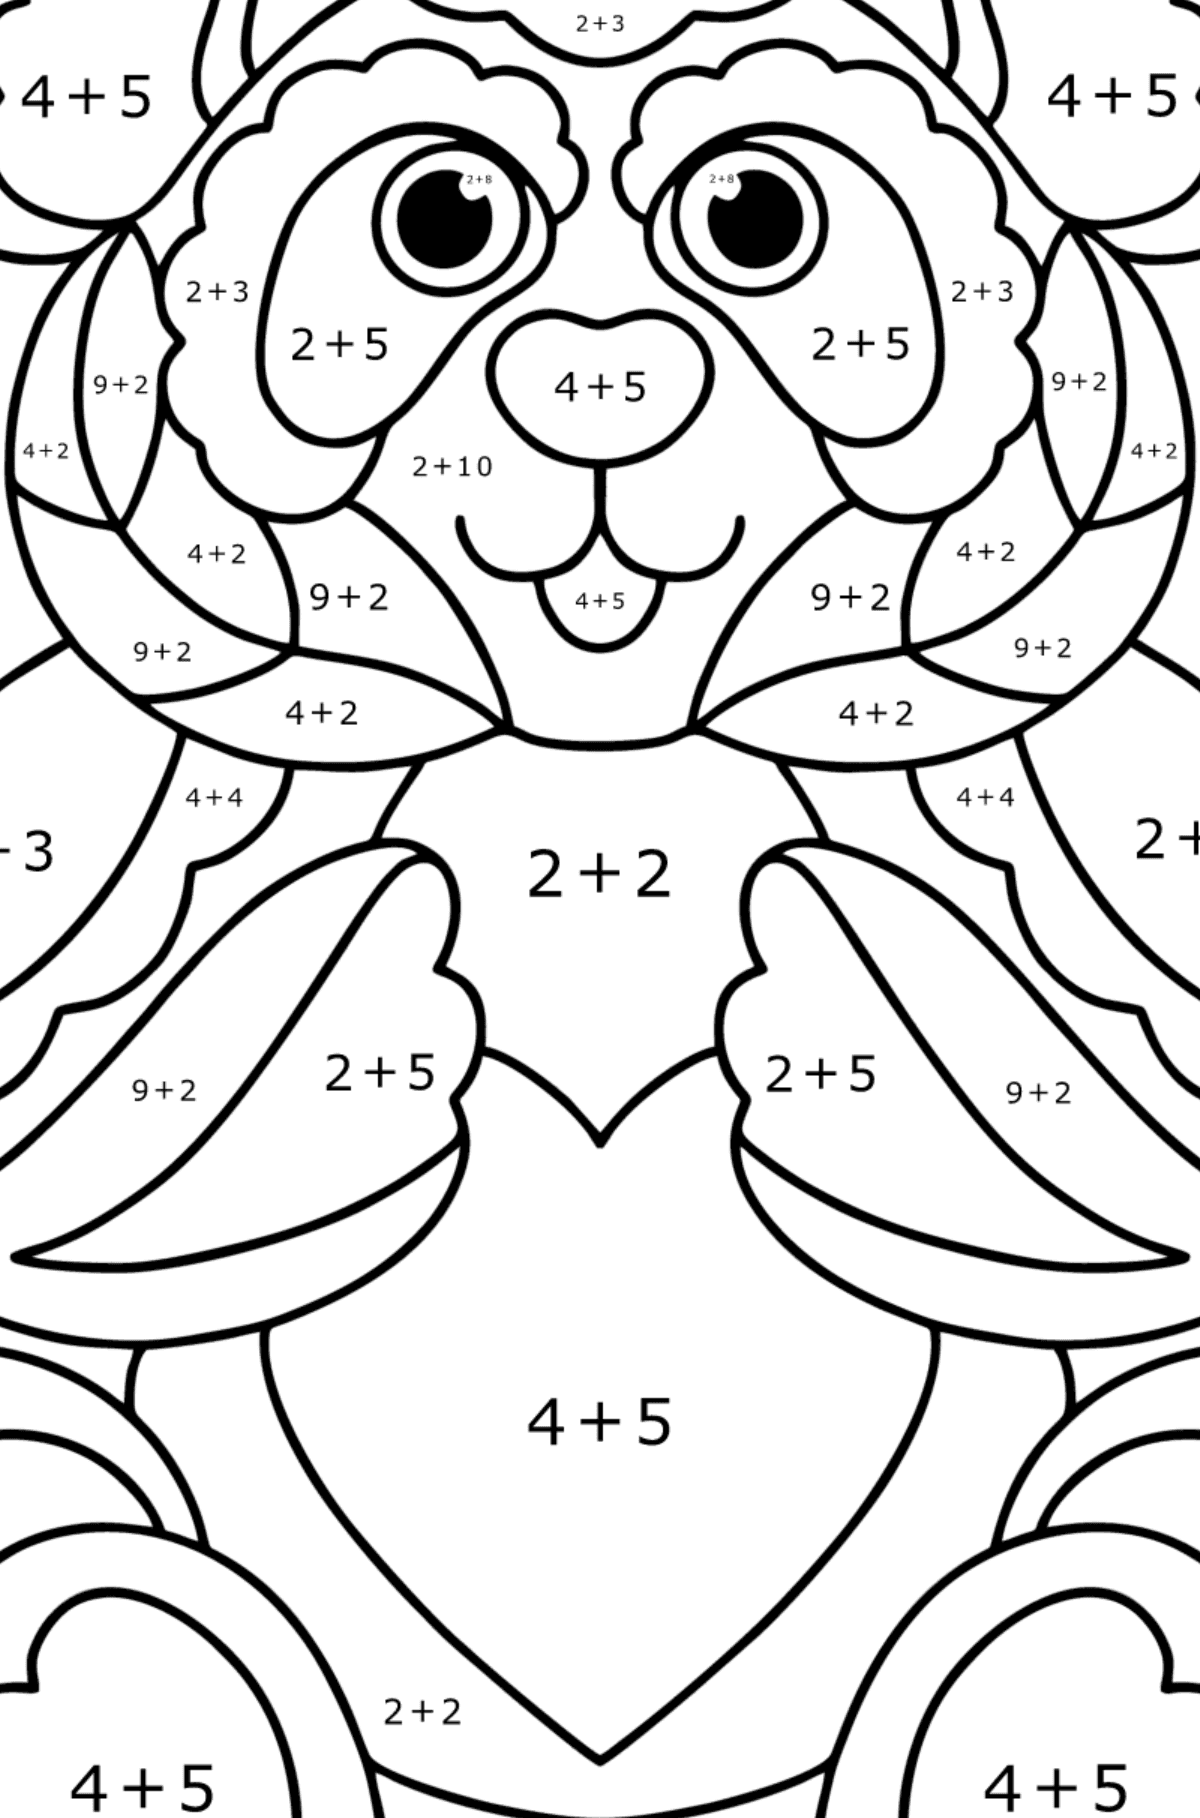 Panda antistress coloring page - Math Coloring - Addition for Kids